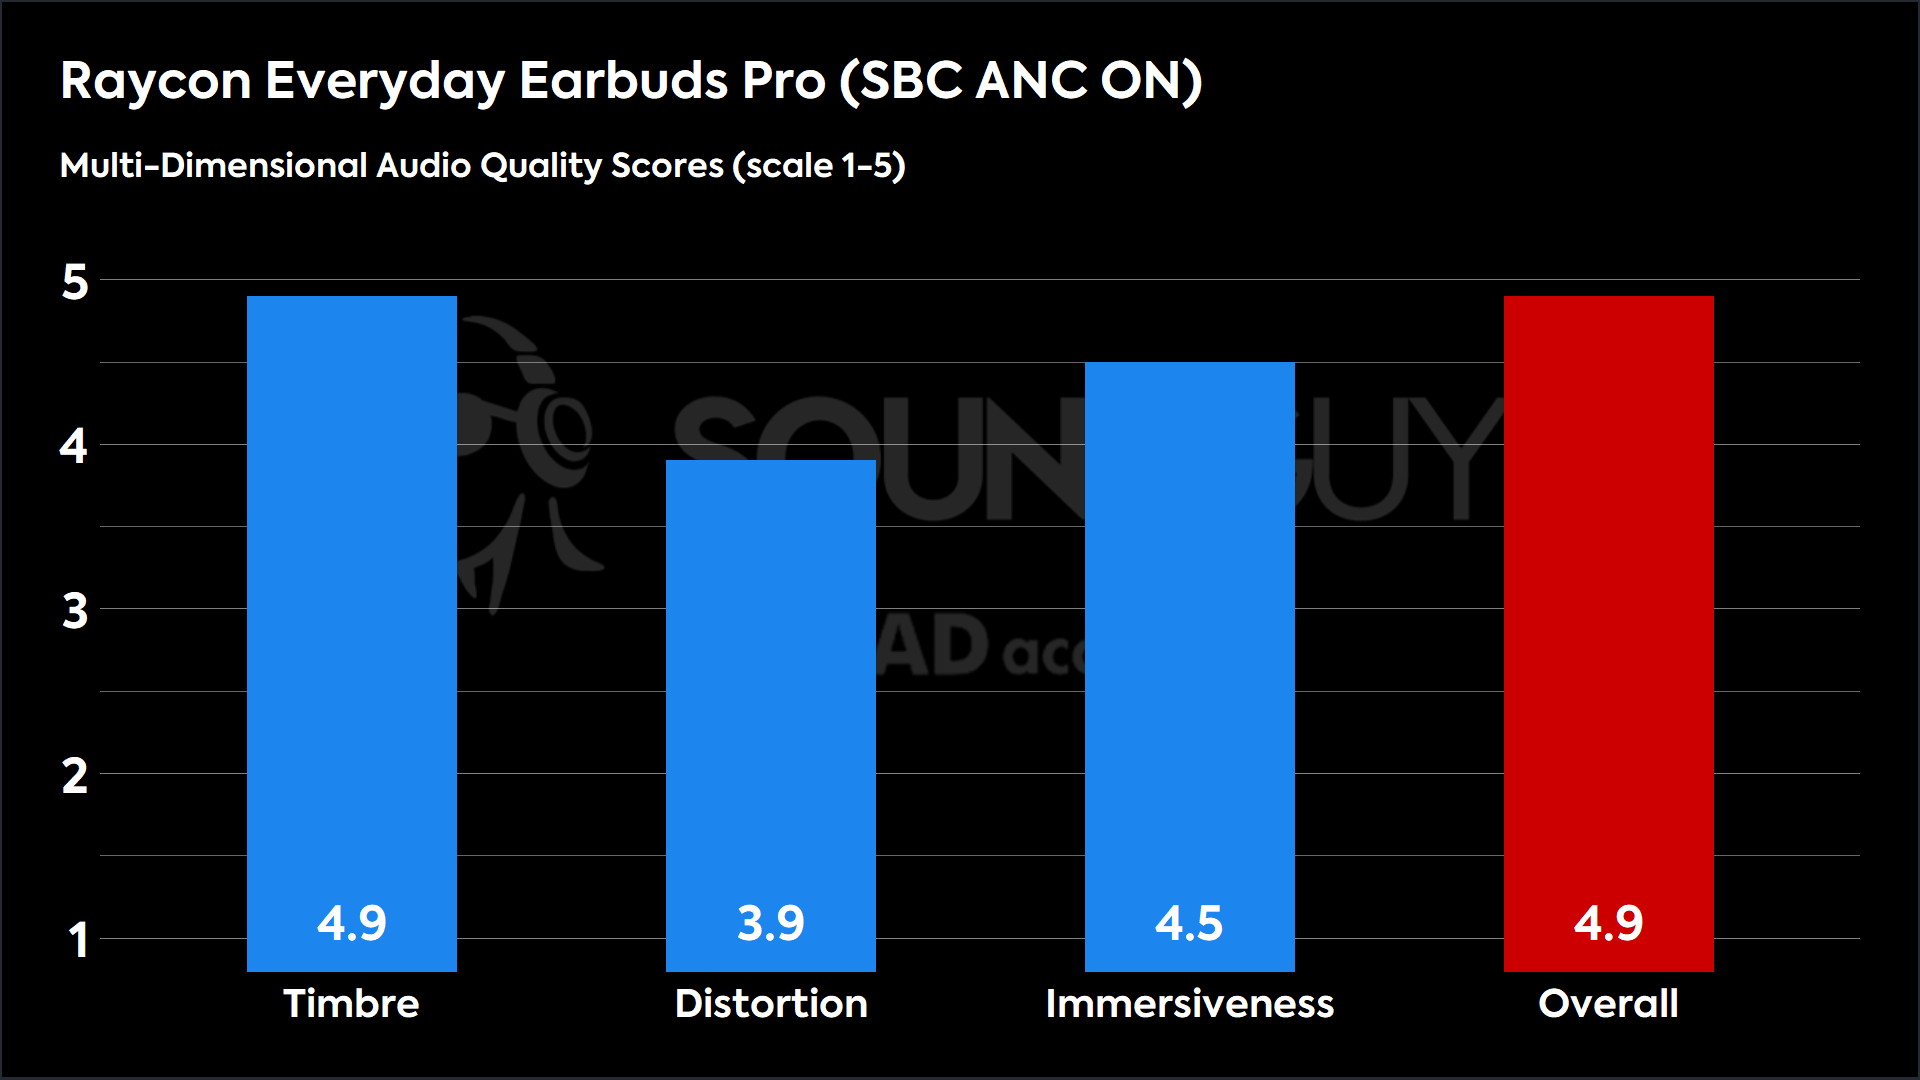 This chart shows the MDAQS results for the Raycon Everyday Earbuds Pro in SBC ANC ON mode. The Timbre score is 4.9, The Distortion score is 3.9, the Immersiveness score is 4.5, and the Overall Score is 4.9).